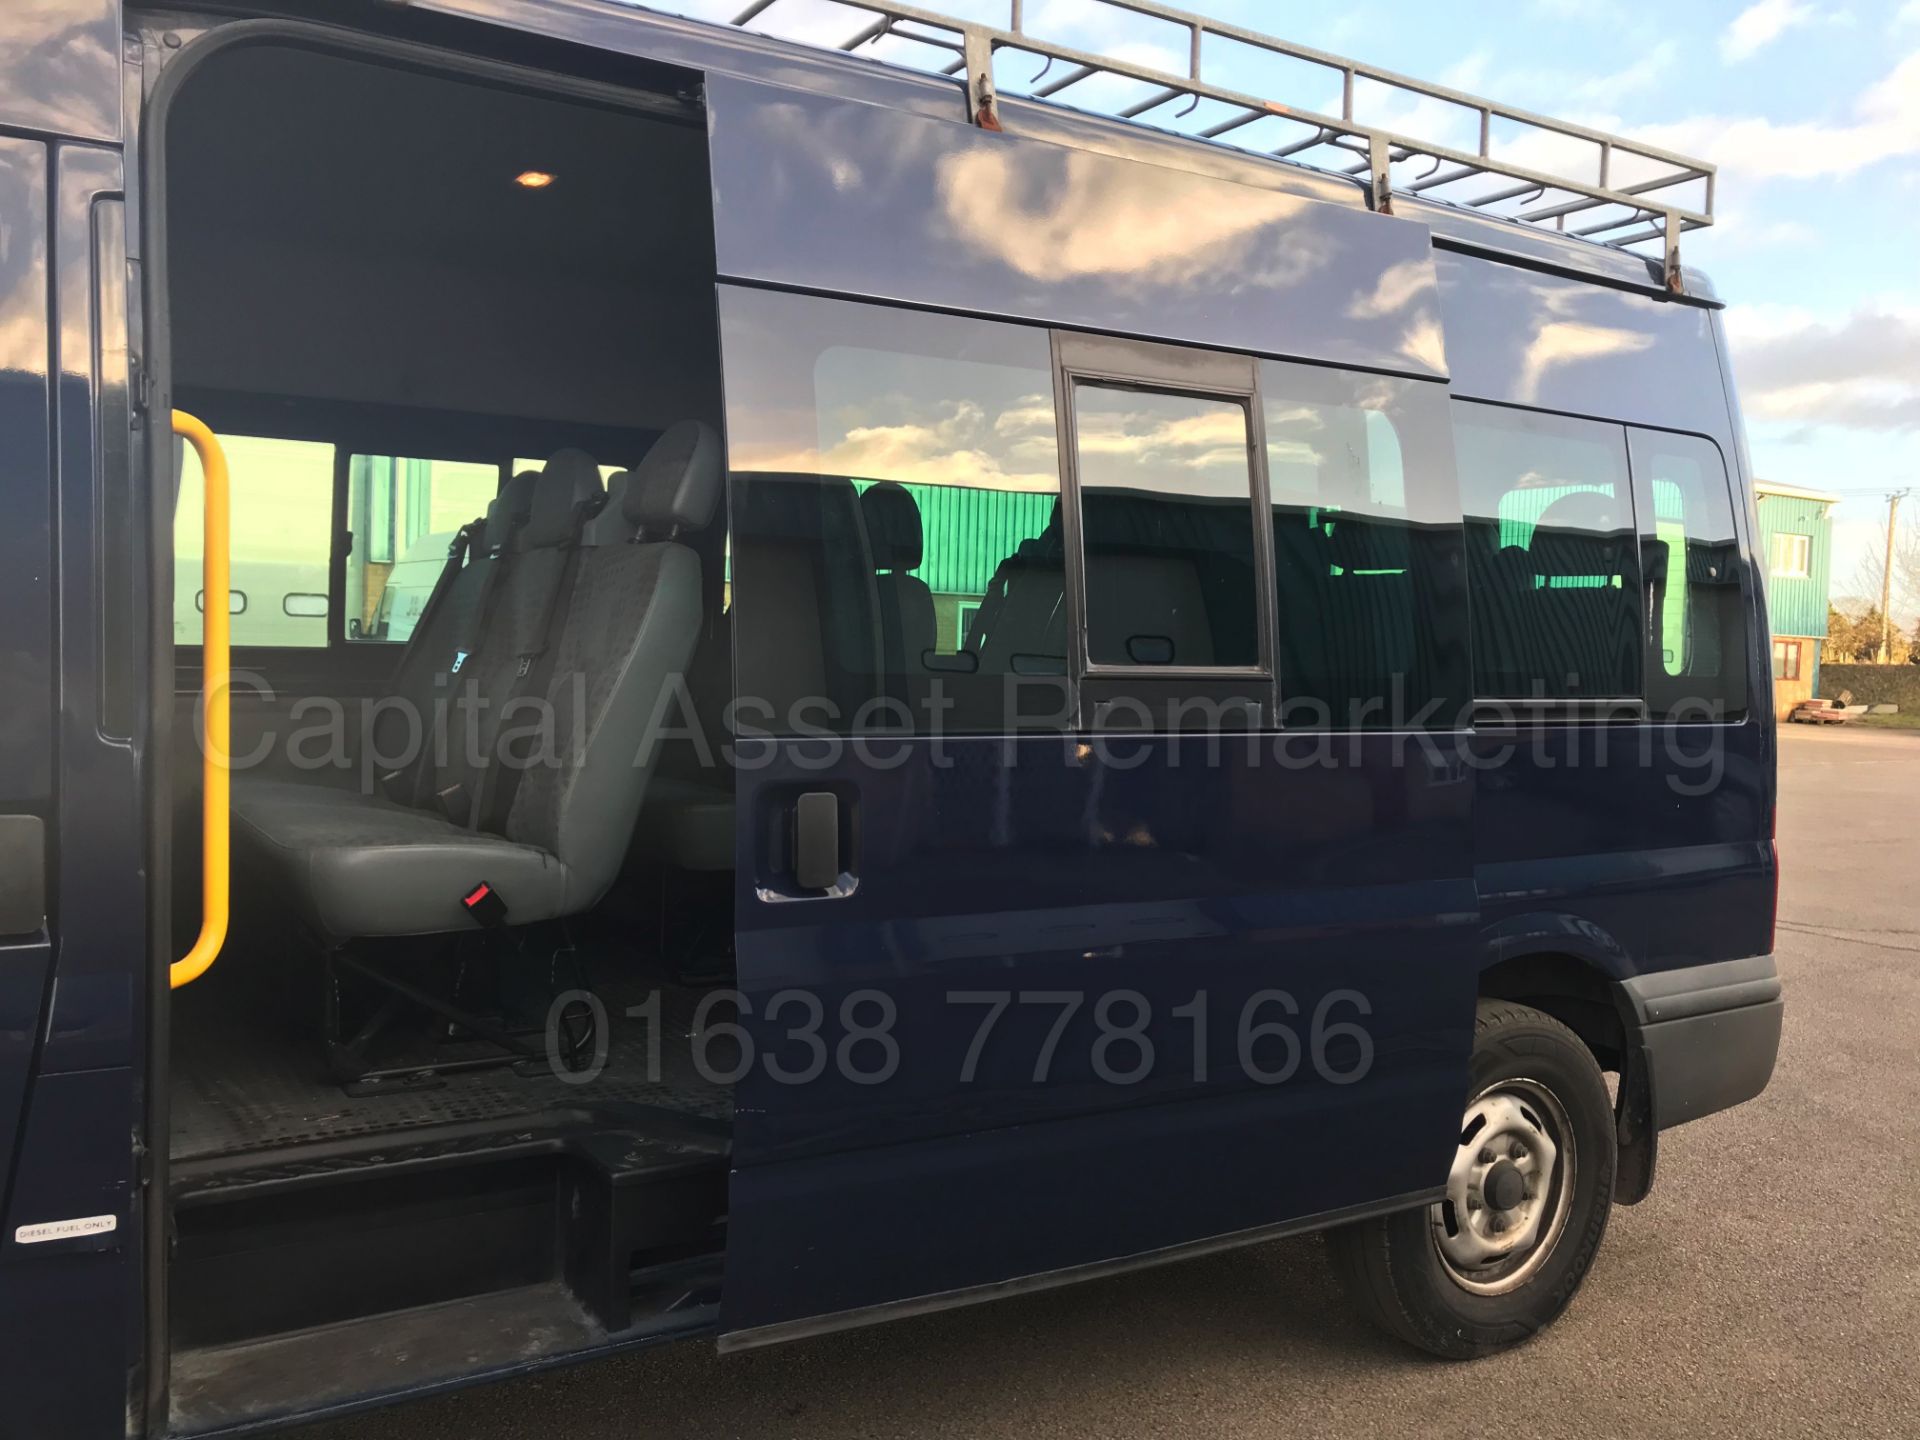 FORD TRANSIT 100 T350 '15 SEATER MINI-BUS' (2010 - 10 REG) '2.4 TDCI - 100 BHP - 5 SPEED' *AIR CON* - Image 15 of 28